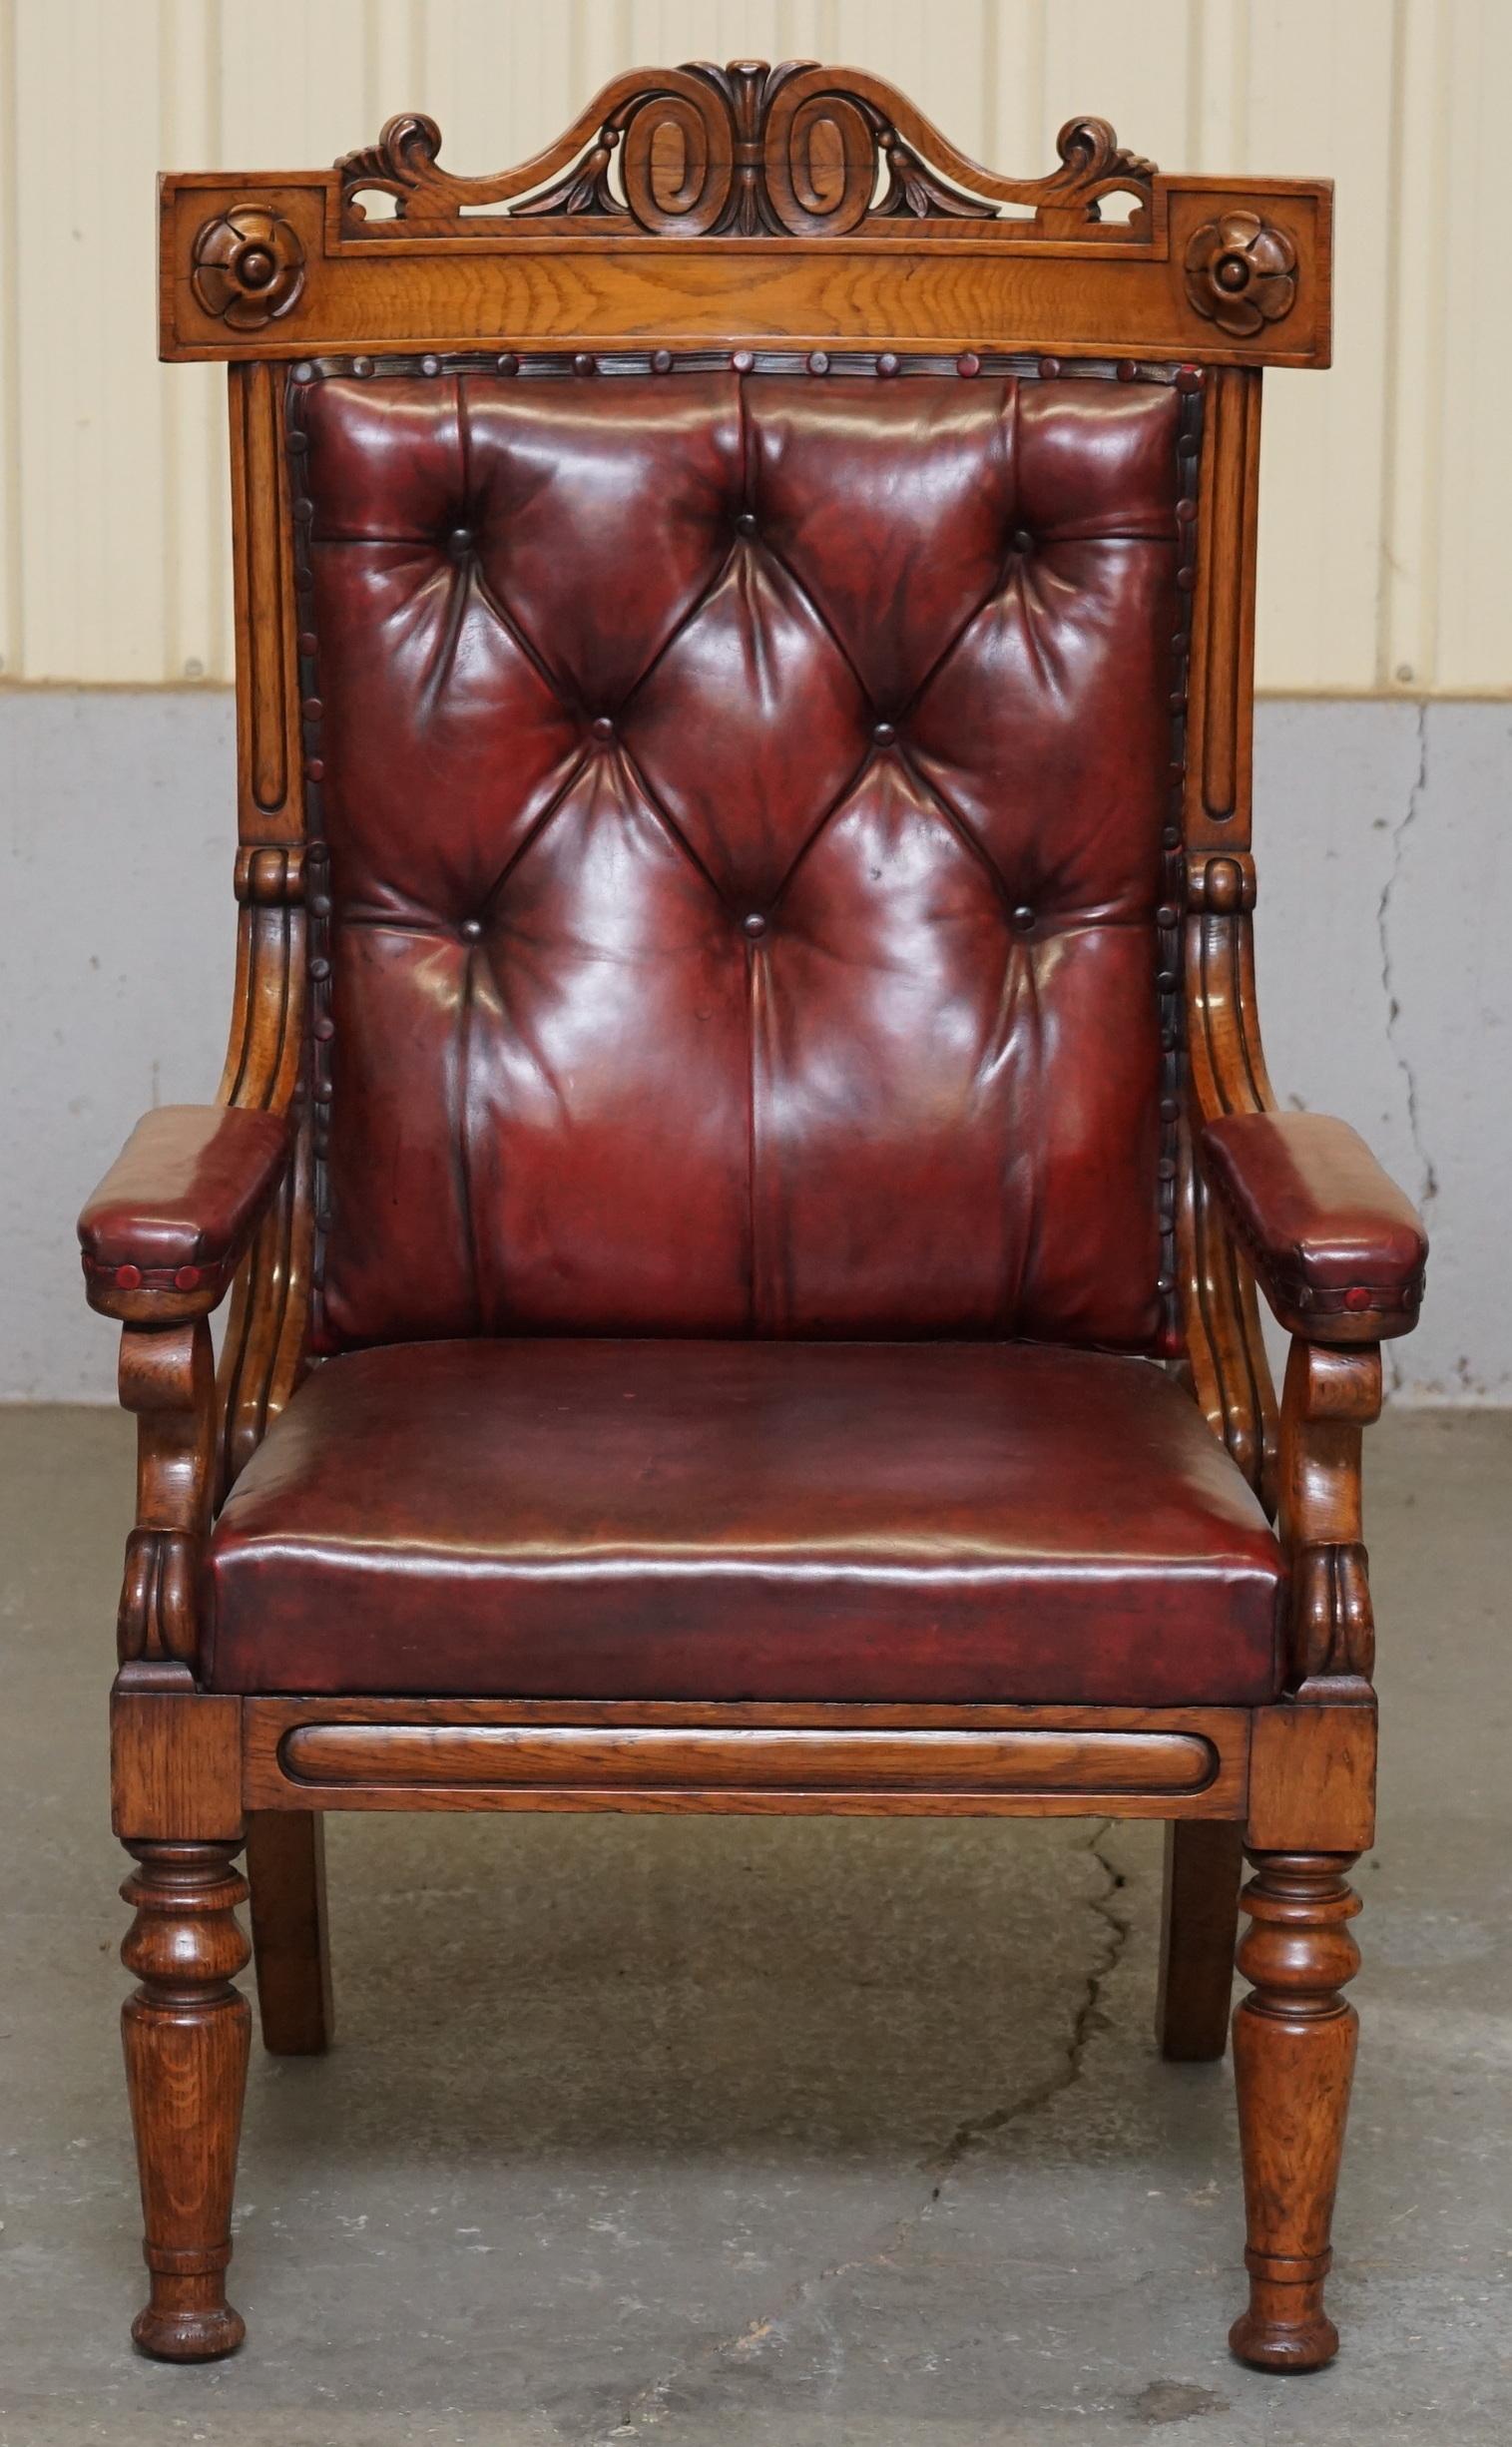 We are delighted to offer for sale this stunning original Royal Estate stamped oxblood leather and oak circa 1840 throne armchair

A very good looking well made and decorative throne armchair. This chair bares the Royal Estate stamp to the rear,